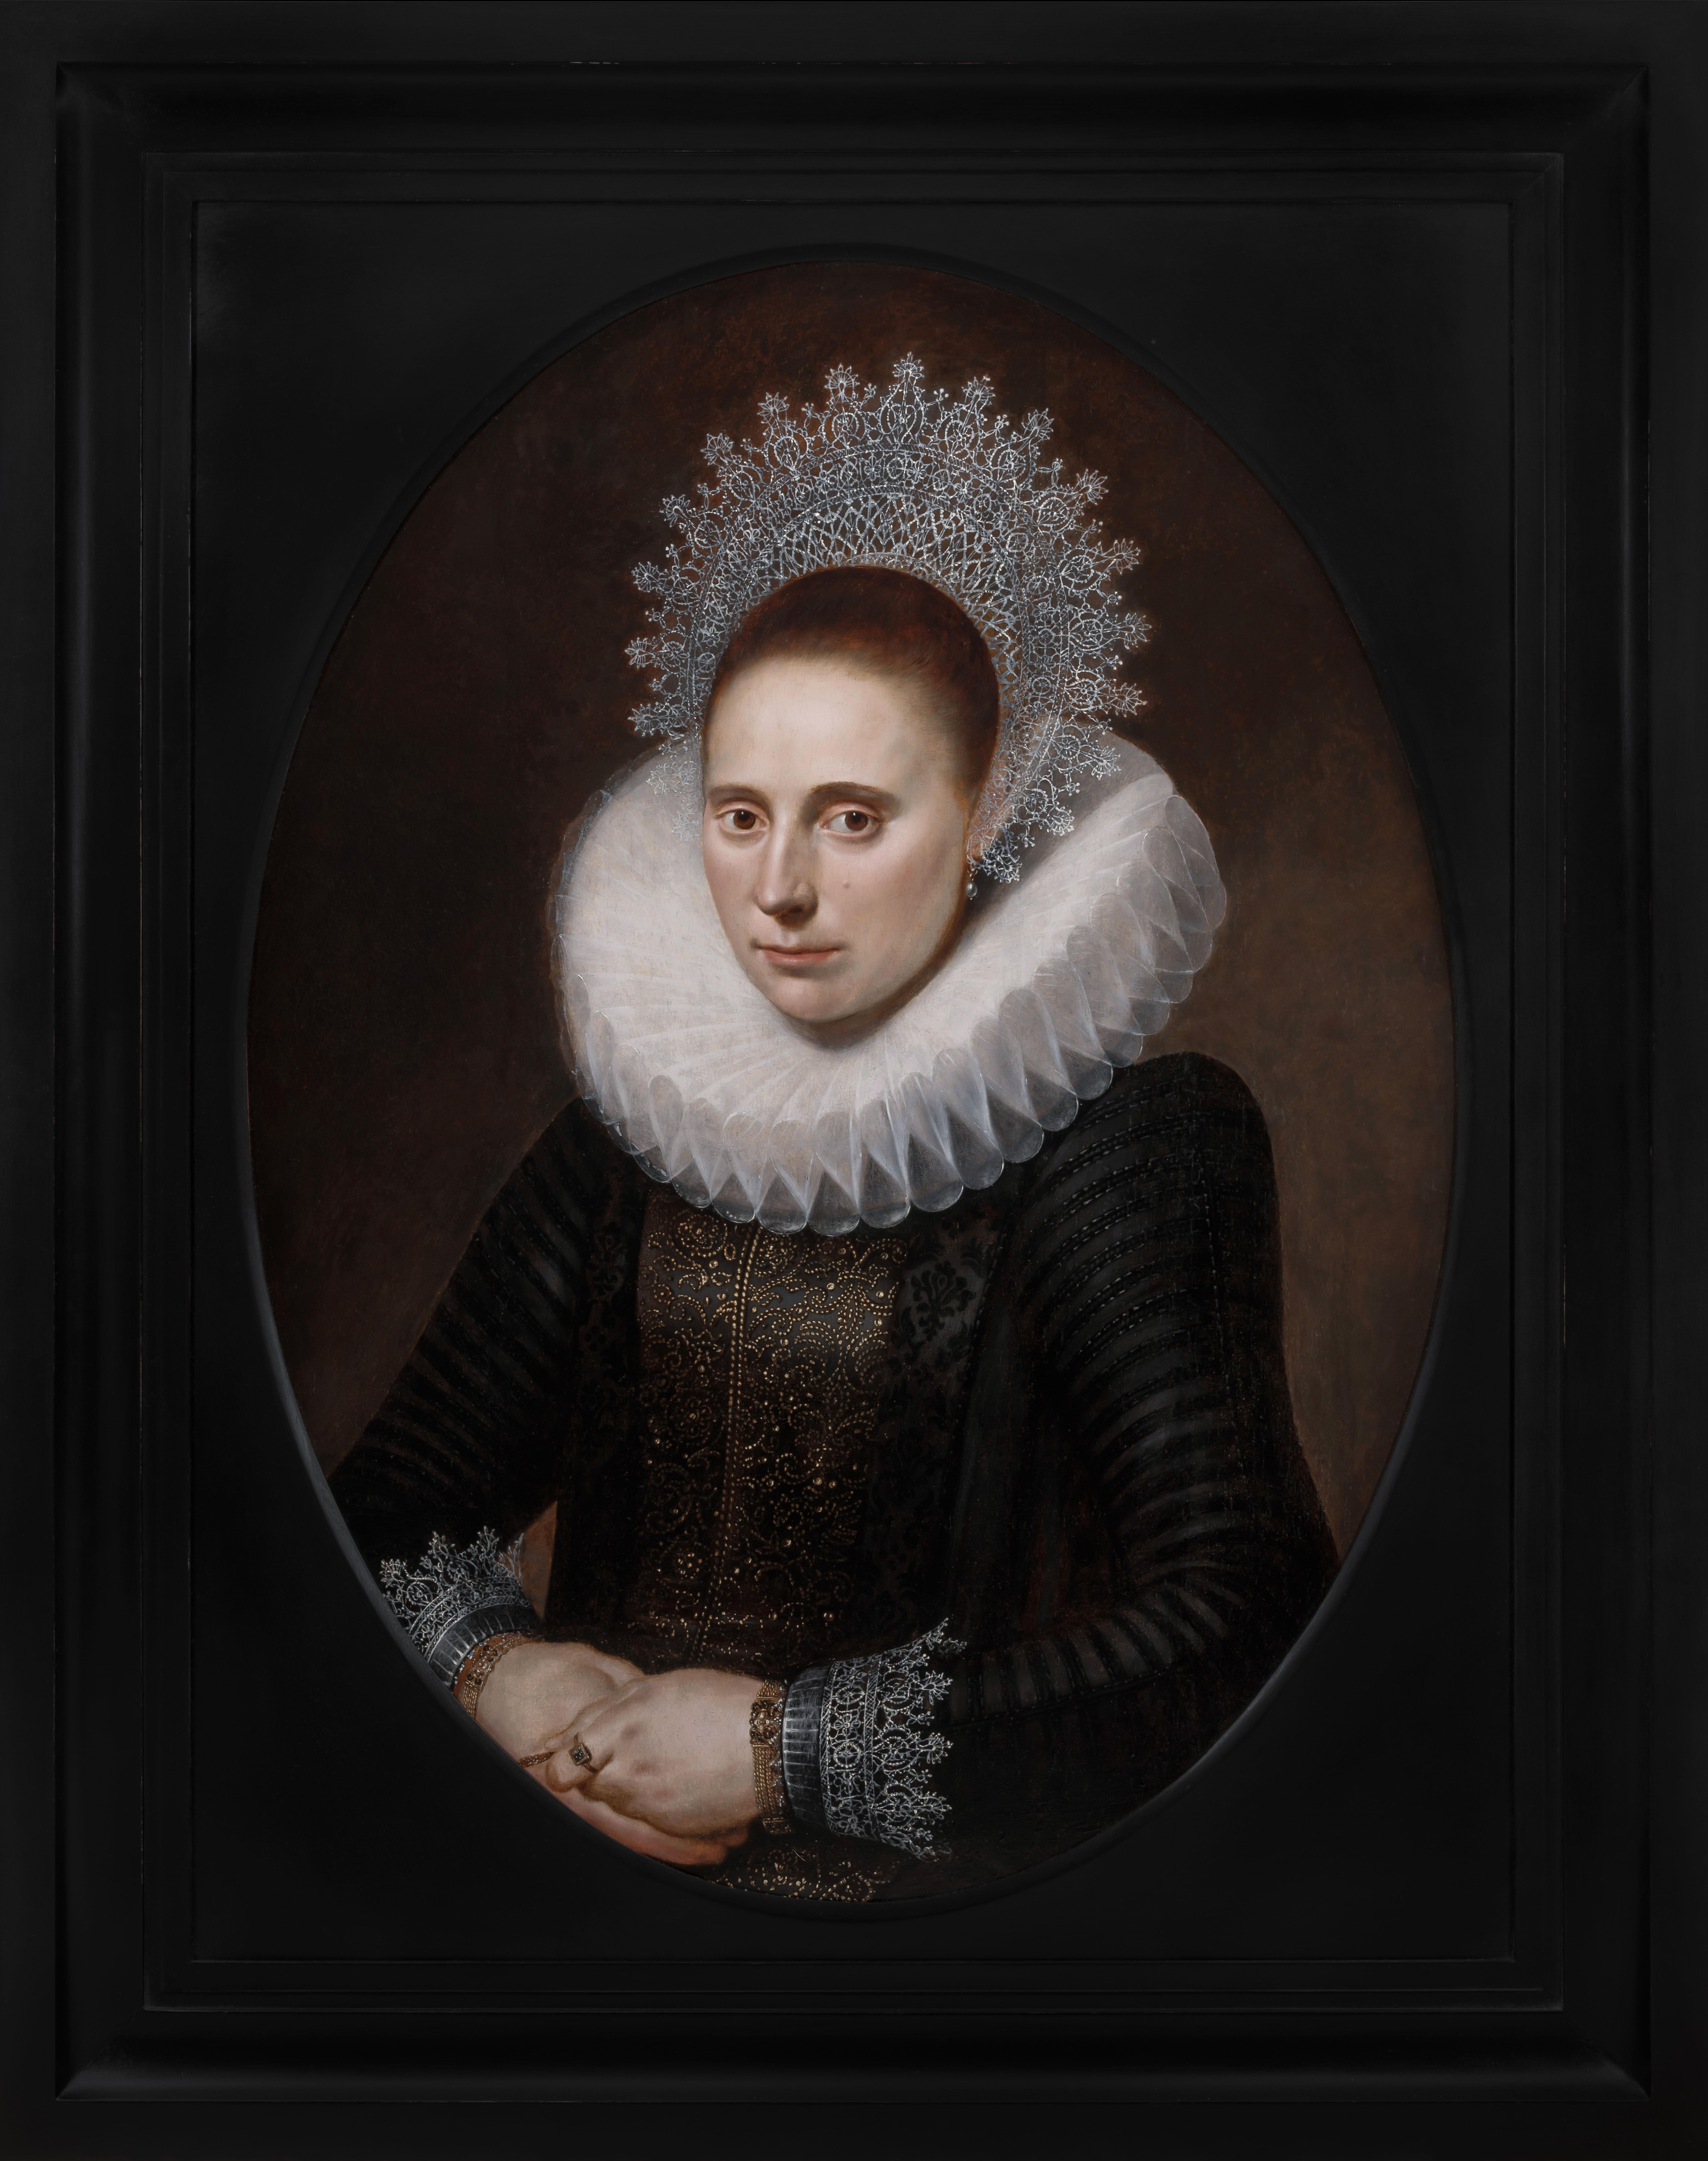 Portrait of a Lady in an Elaborate Ruff & Lace Coif c.1610-20, Dutch Old Master - Old Masters Painting by Cornelius van der Voort